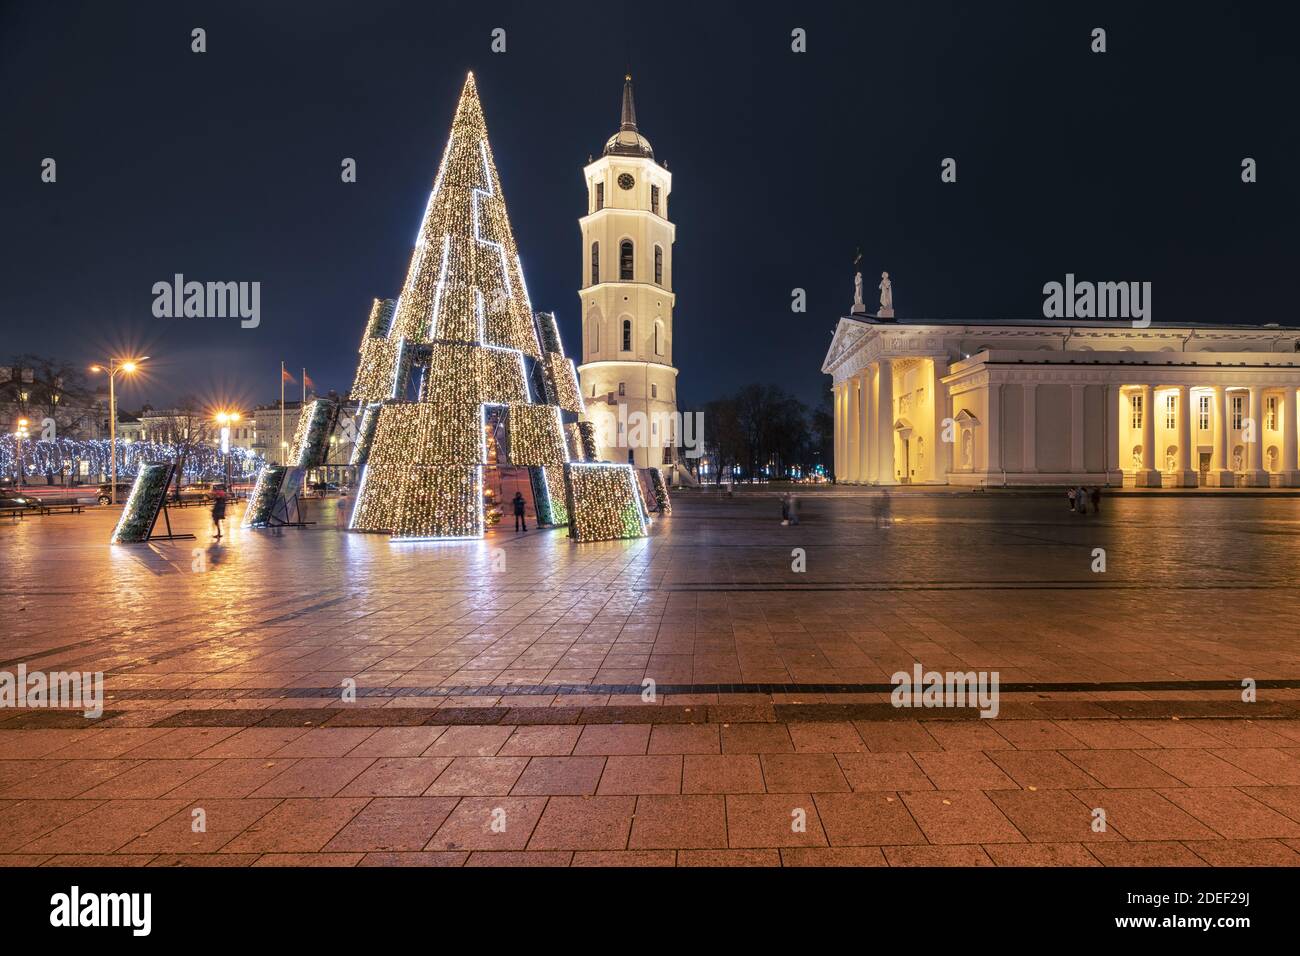 Vilnius Christmas Tree 2020 and Vilnius Cathedral Square at night Stock Photo